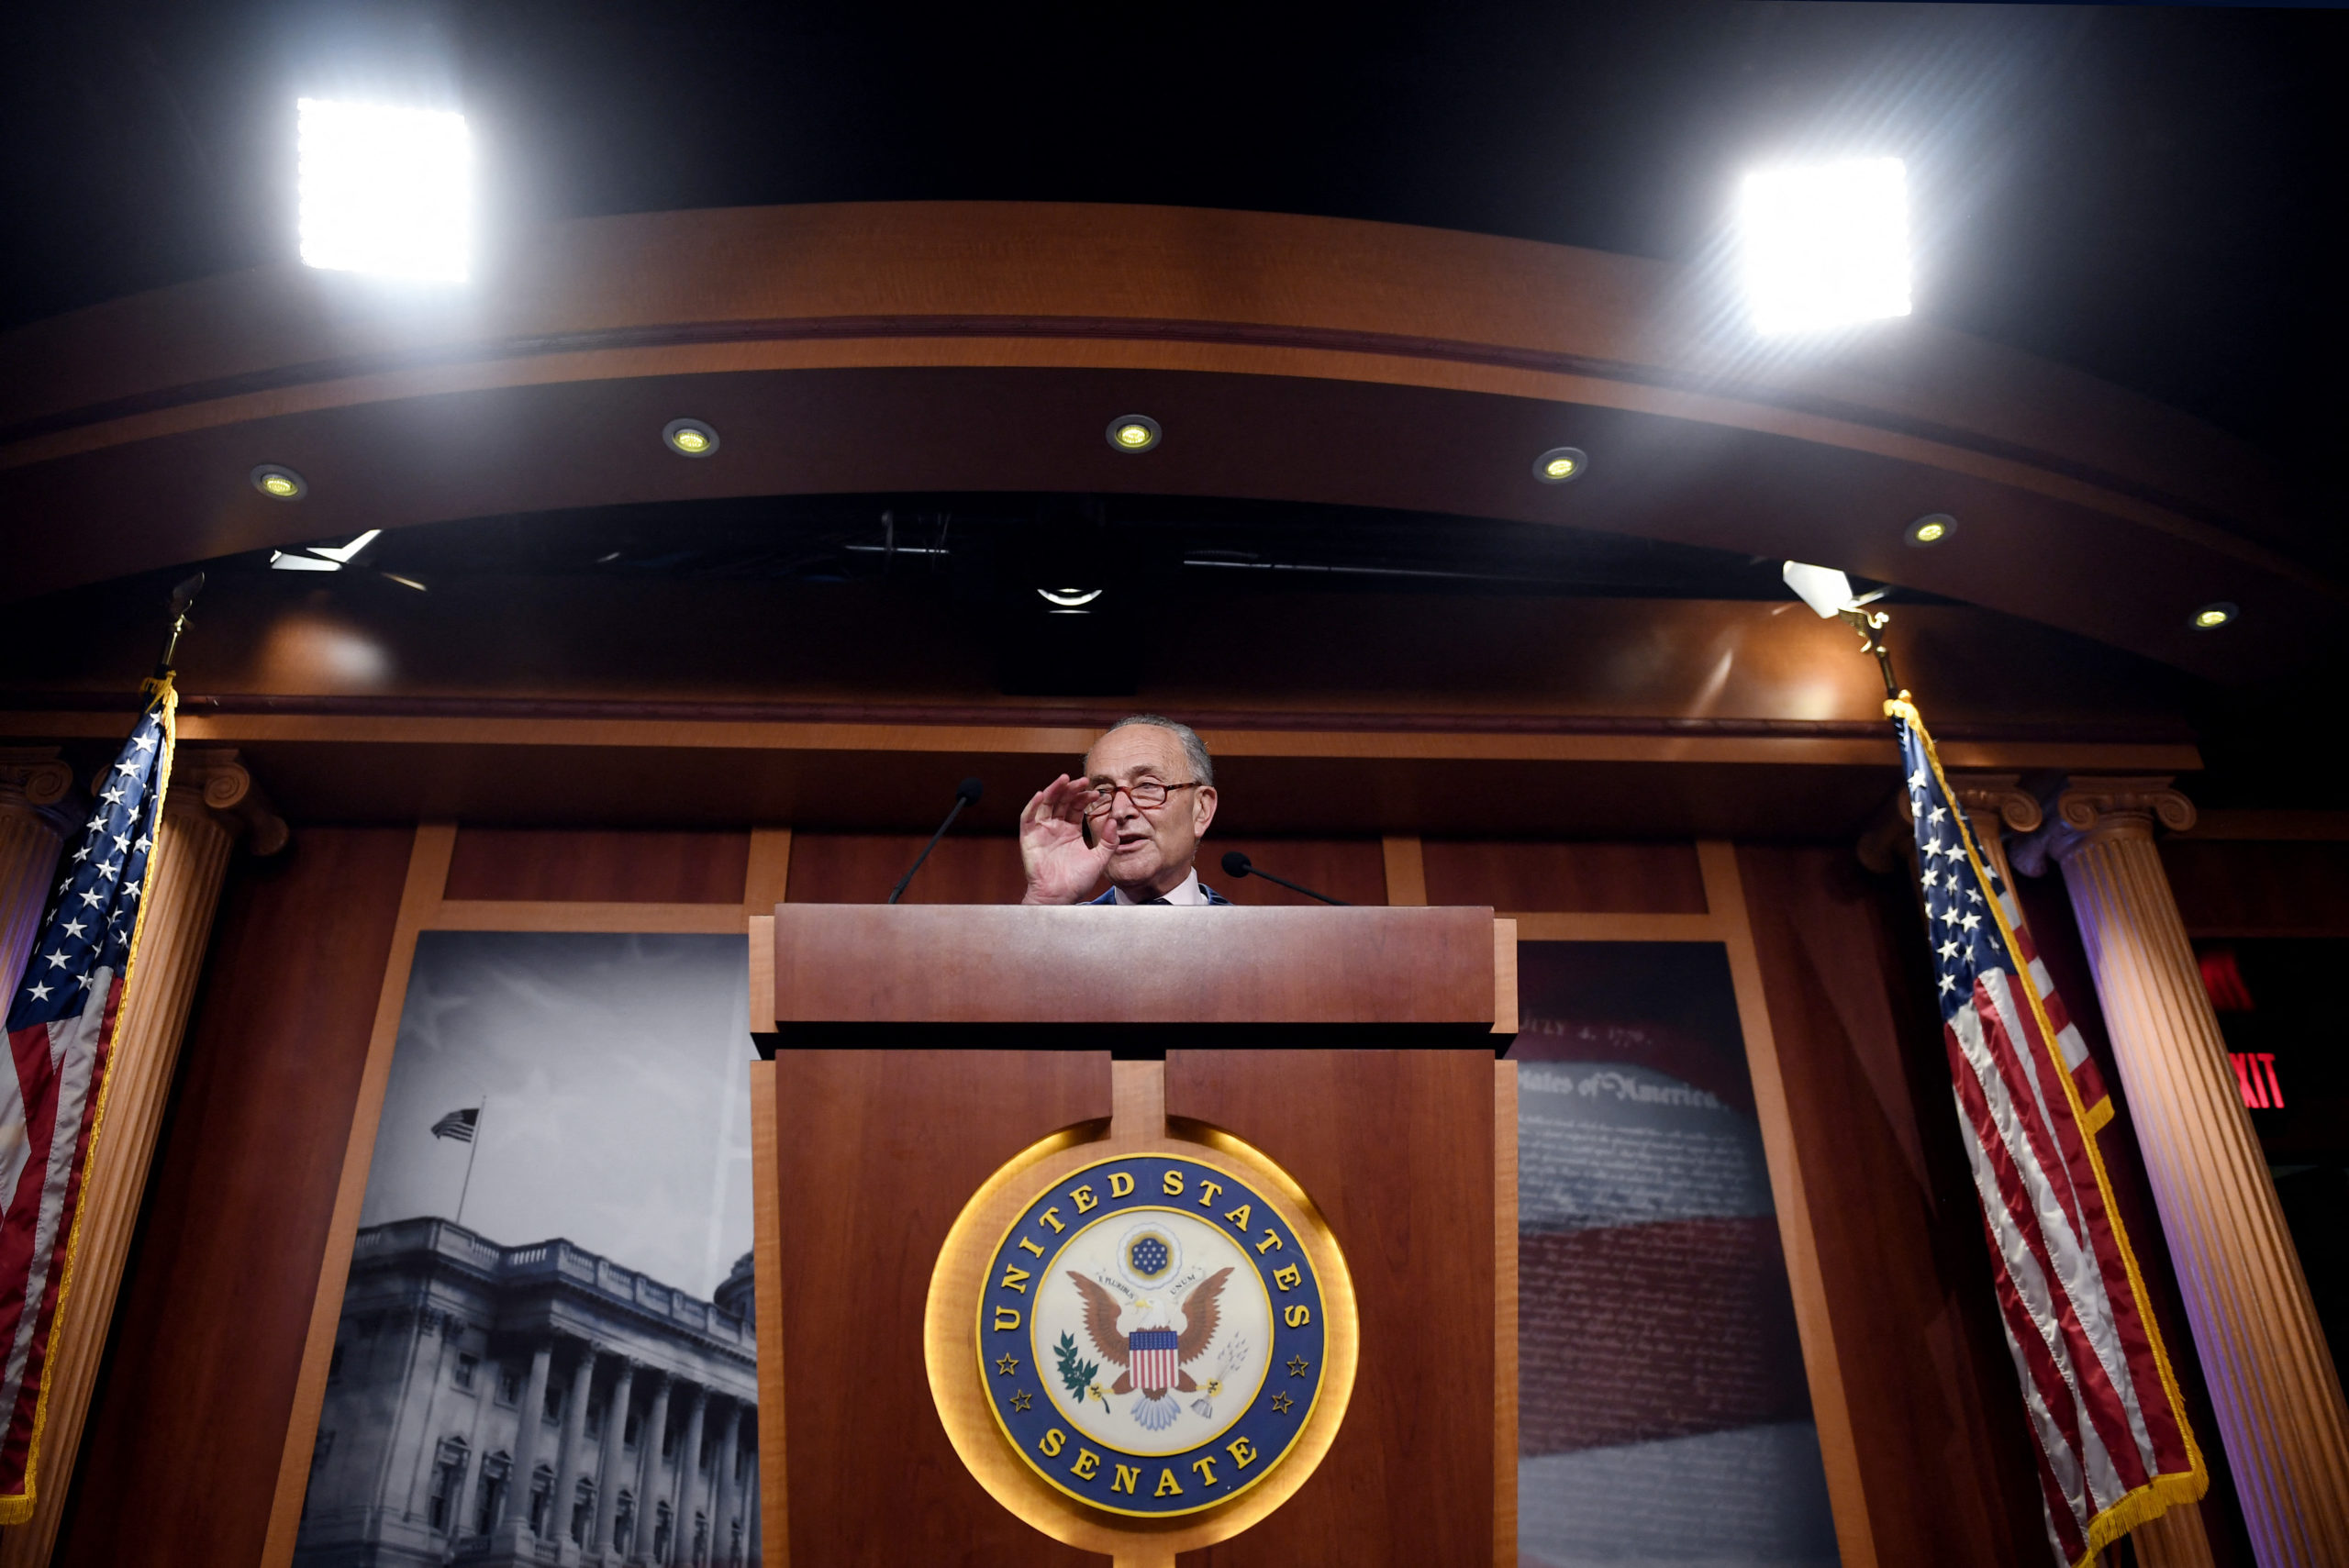 Senate Majority Leader Chuck Schumer speaks to the press on Aug. 11. (Olivier Douliery/AFP via Getty Images)